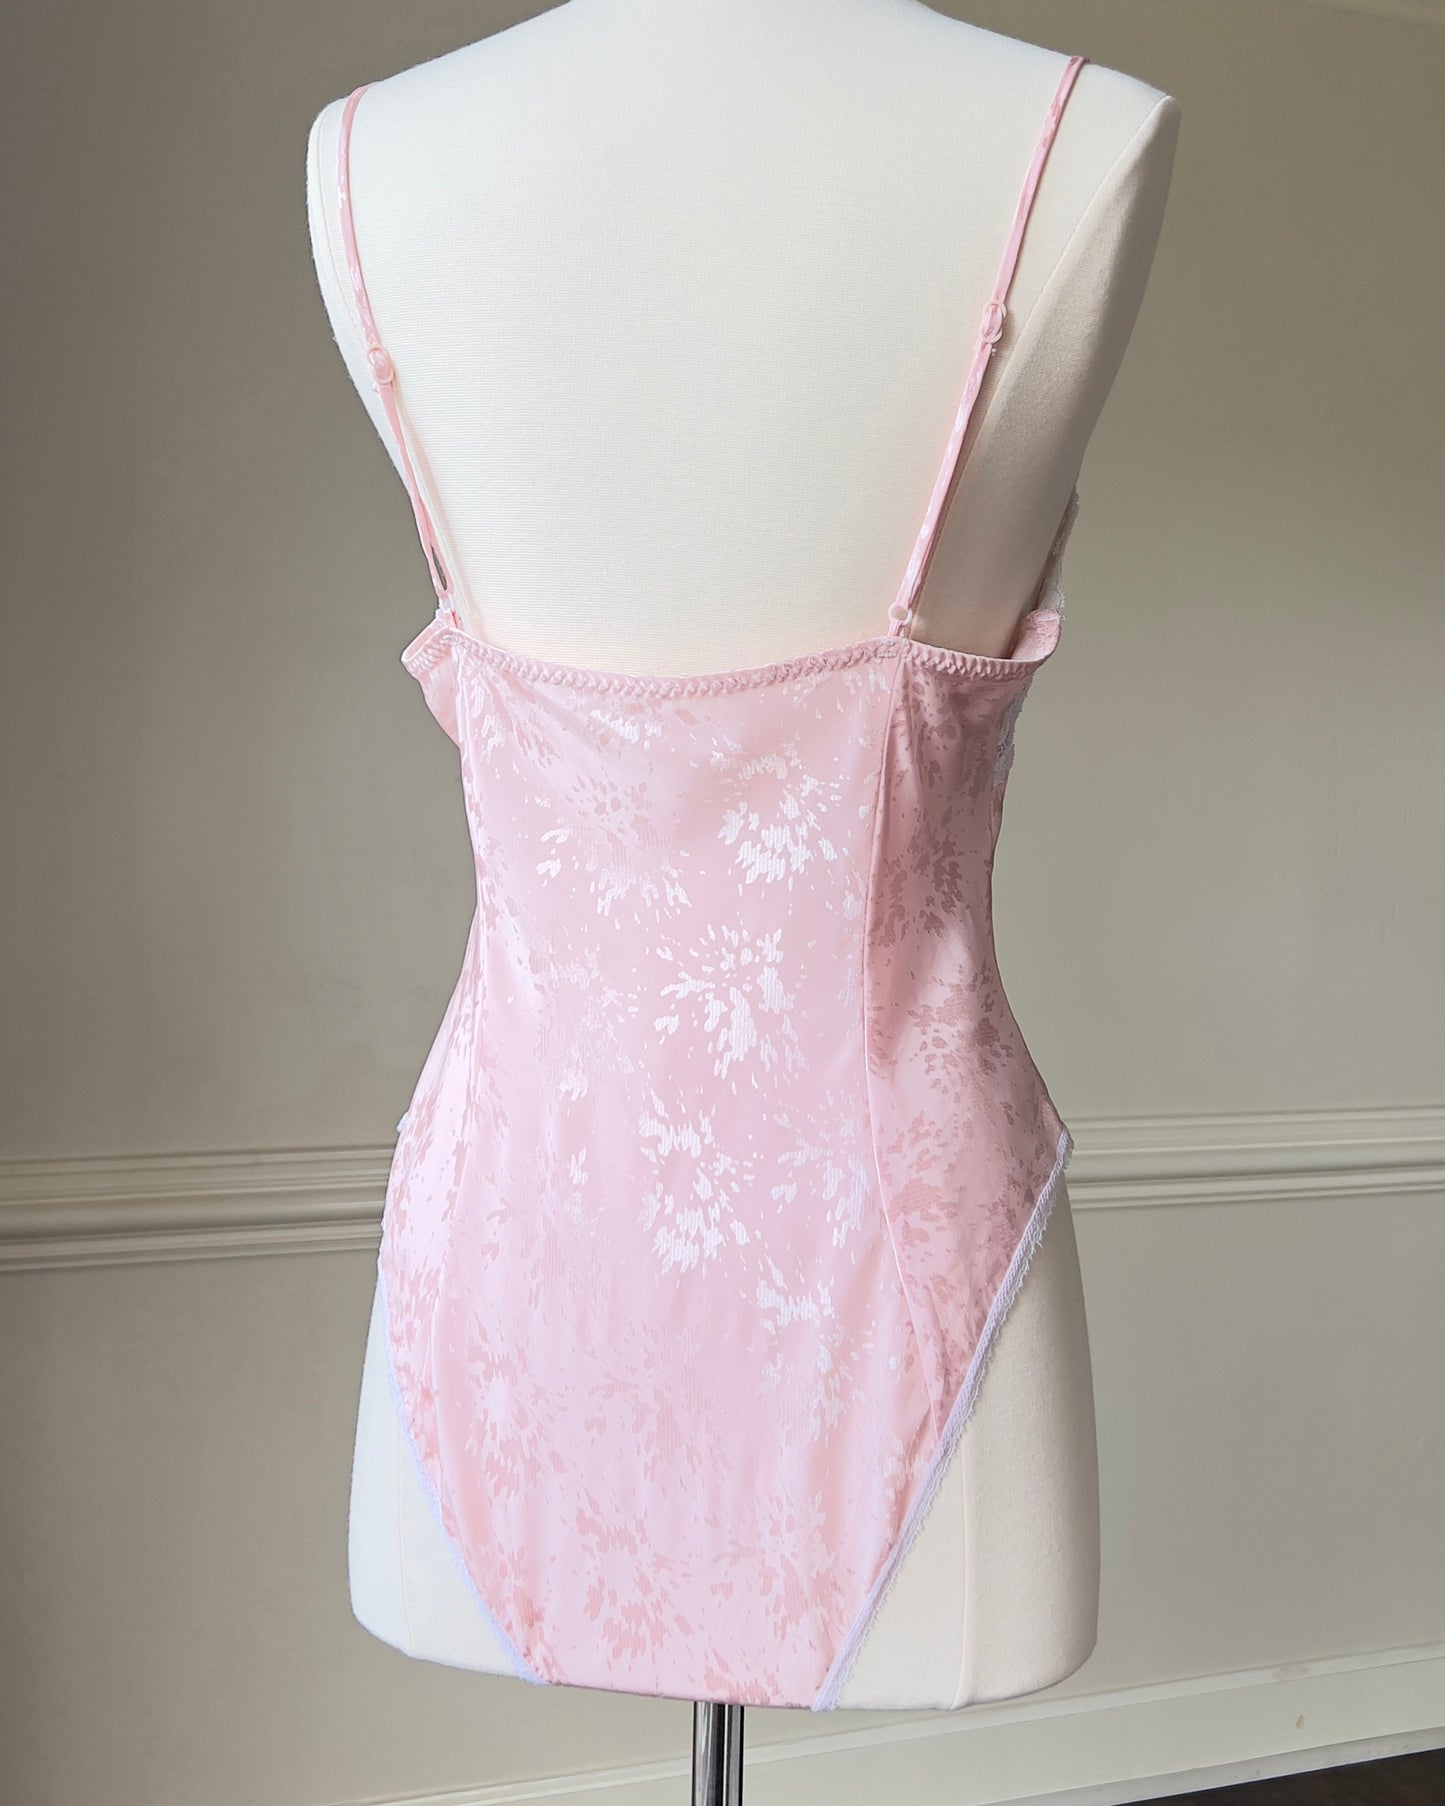 Baby Blushed Bodysuit featuring Lace Trimmings Detail with Embossed Patterned Fabric